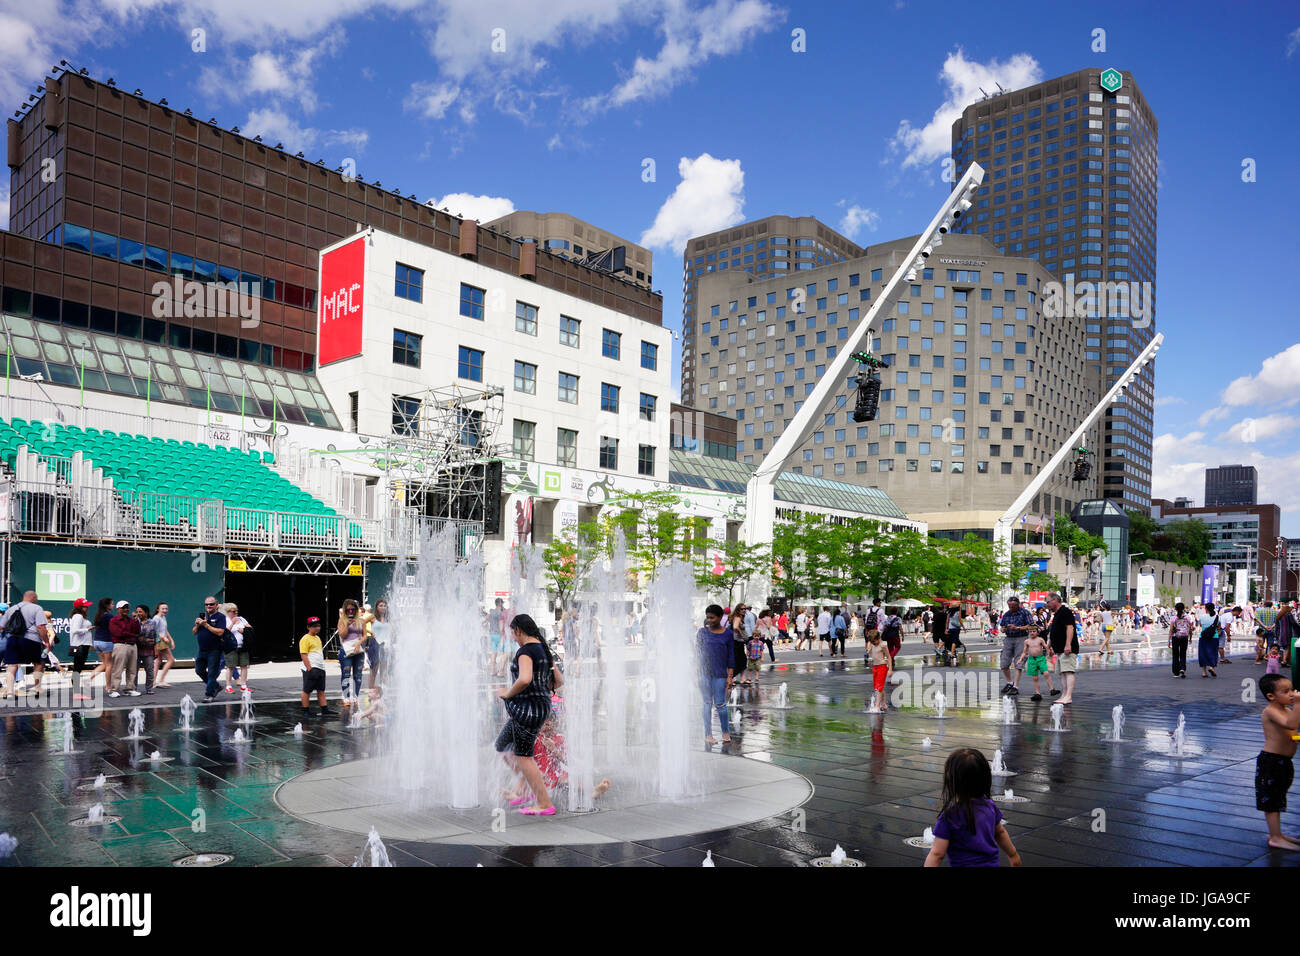 People out and about at the Place des Festivals during the Montreal International Jazz Festival. Stock Photo